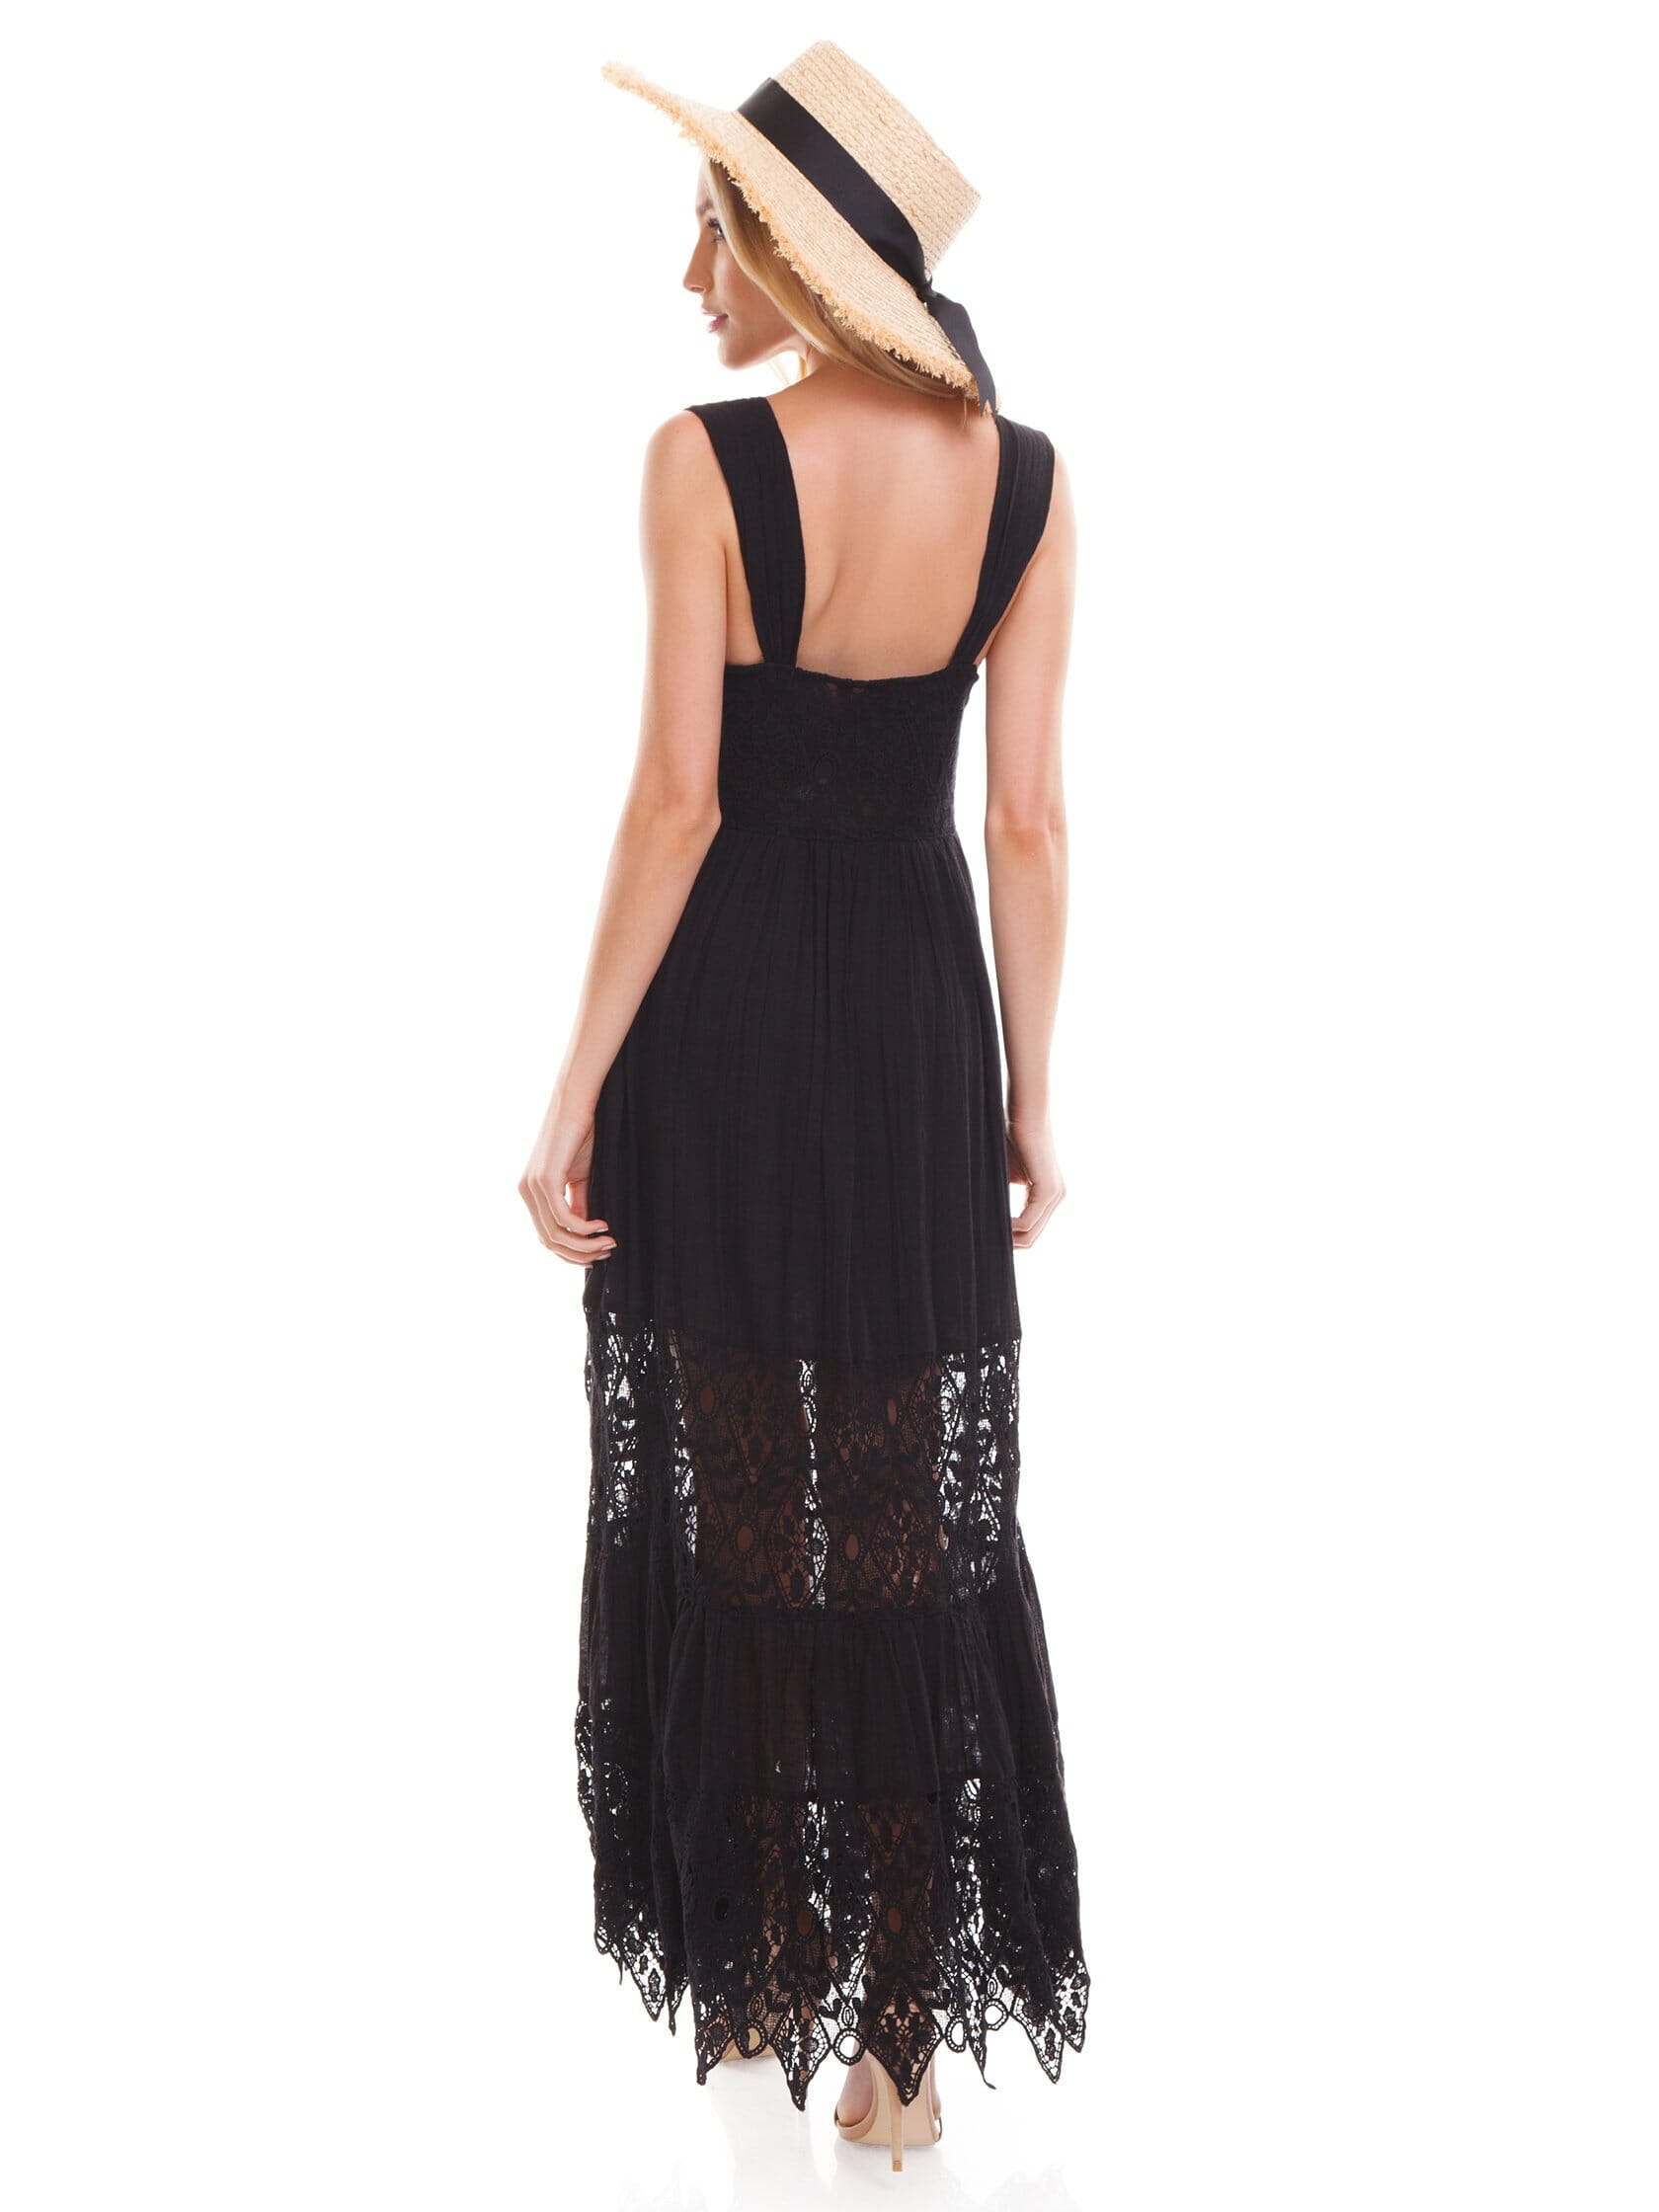 Free People Caught Your Eye Maxi Dress in Black